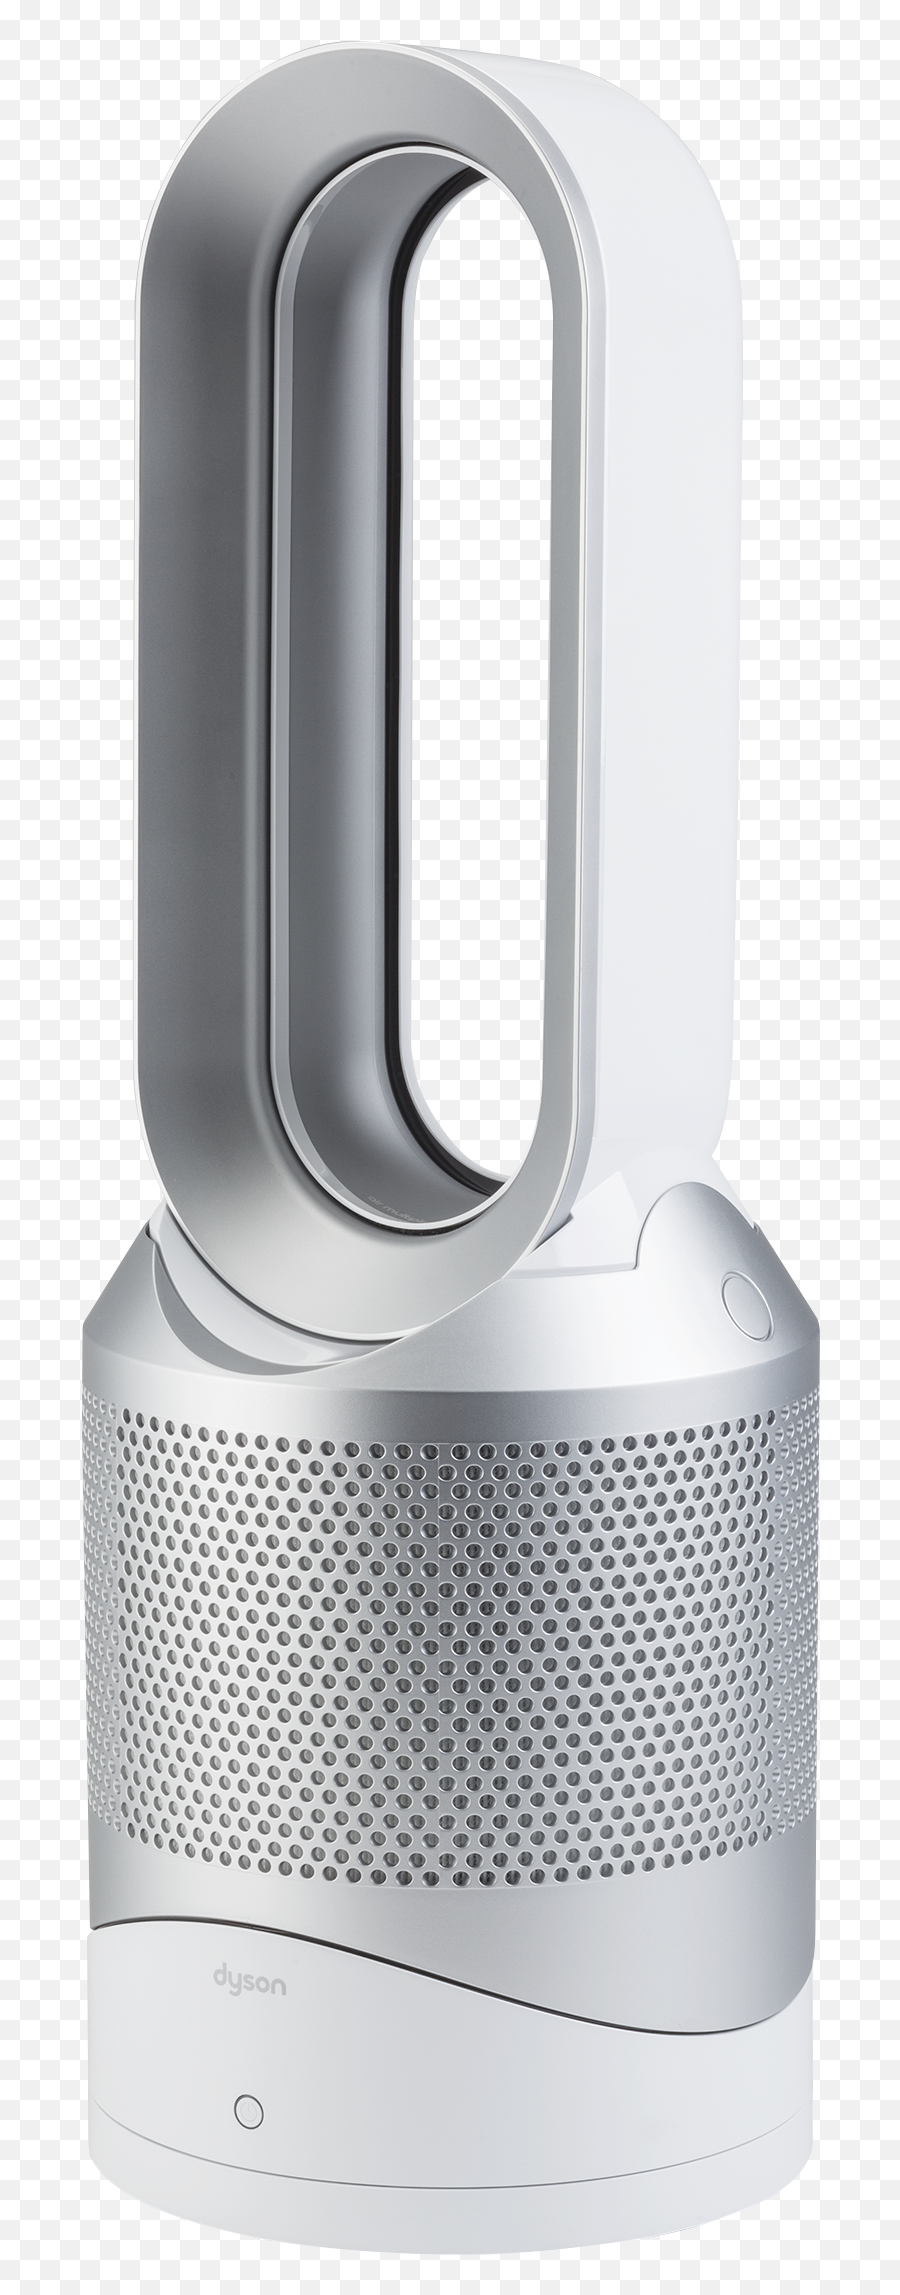 Dyson Pure Hotcool Link Wifi Space Heater - Consumer Reports Emoji,Hot Model Png